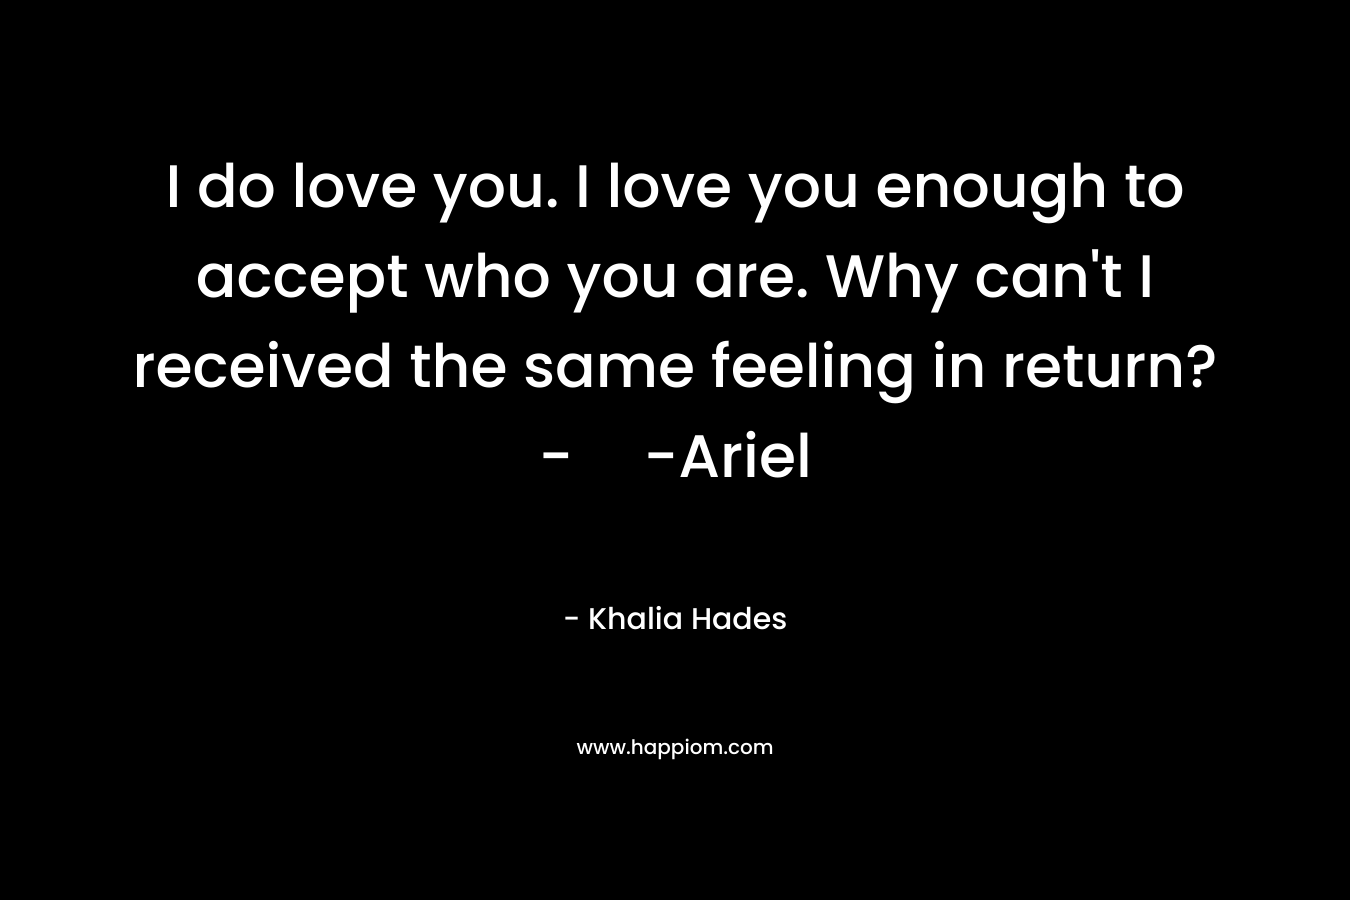 I do love you. I love you enough to accept who you are. Why can't I received the same feeling in return?--Ariel